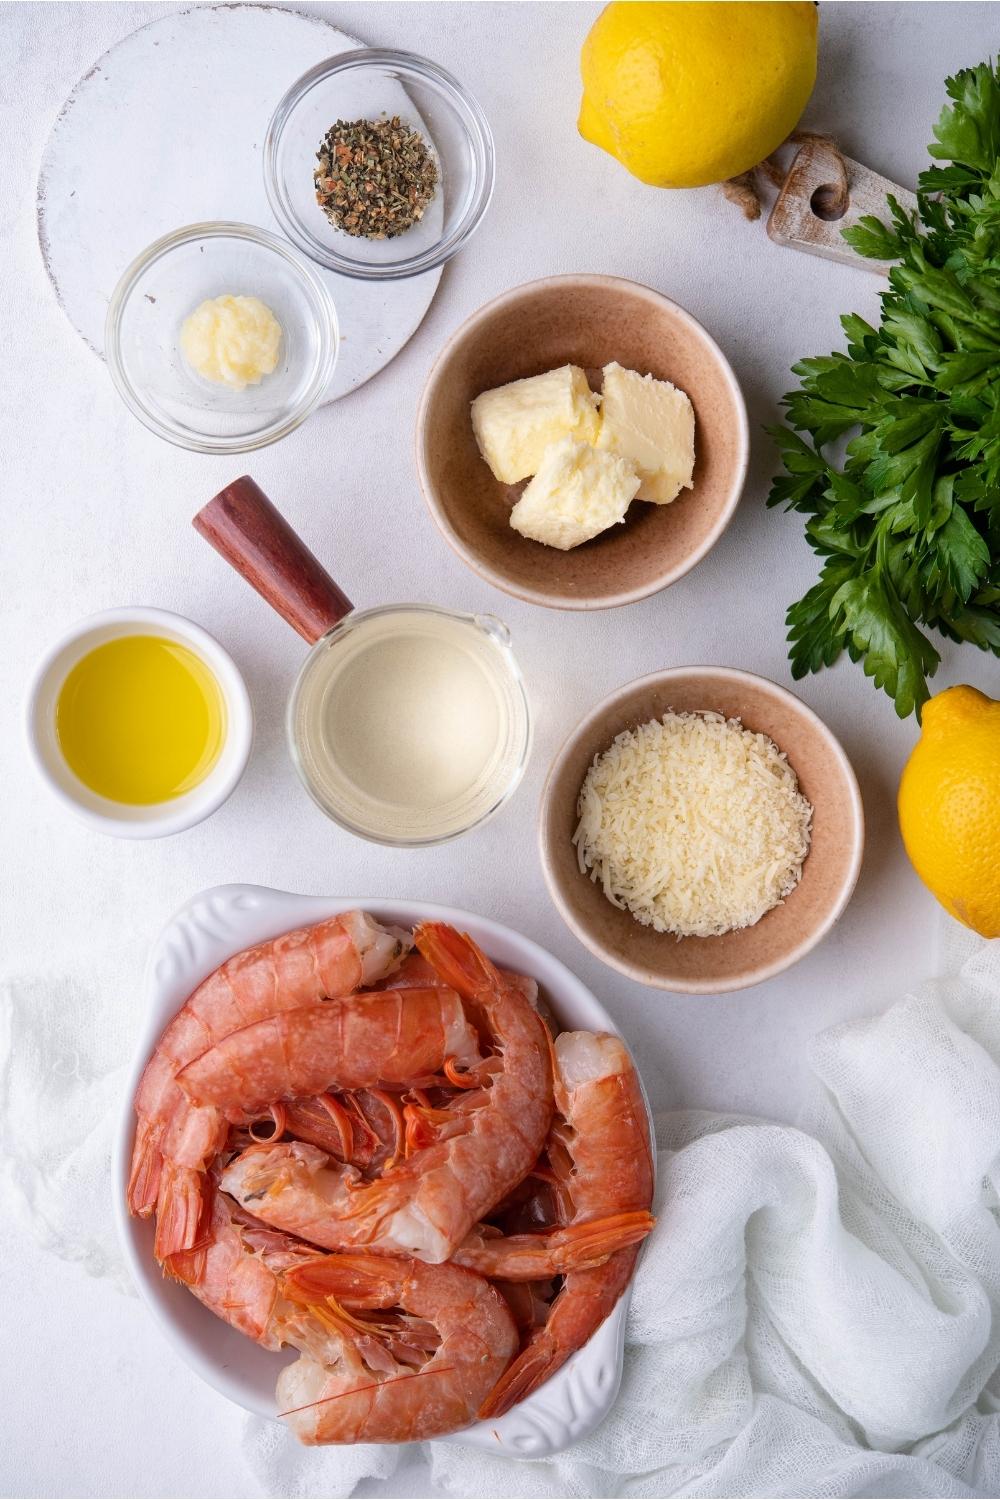 An assortment of ingredients to make shrimp scampi including bowls of raw shrimp, cheese, butter, seasonings, a lemon, and parsley.